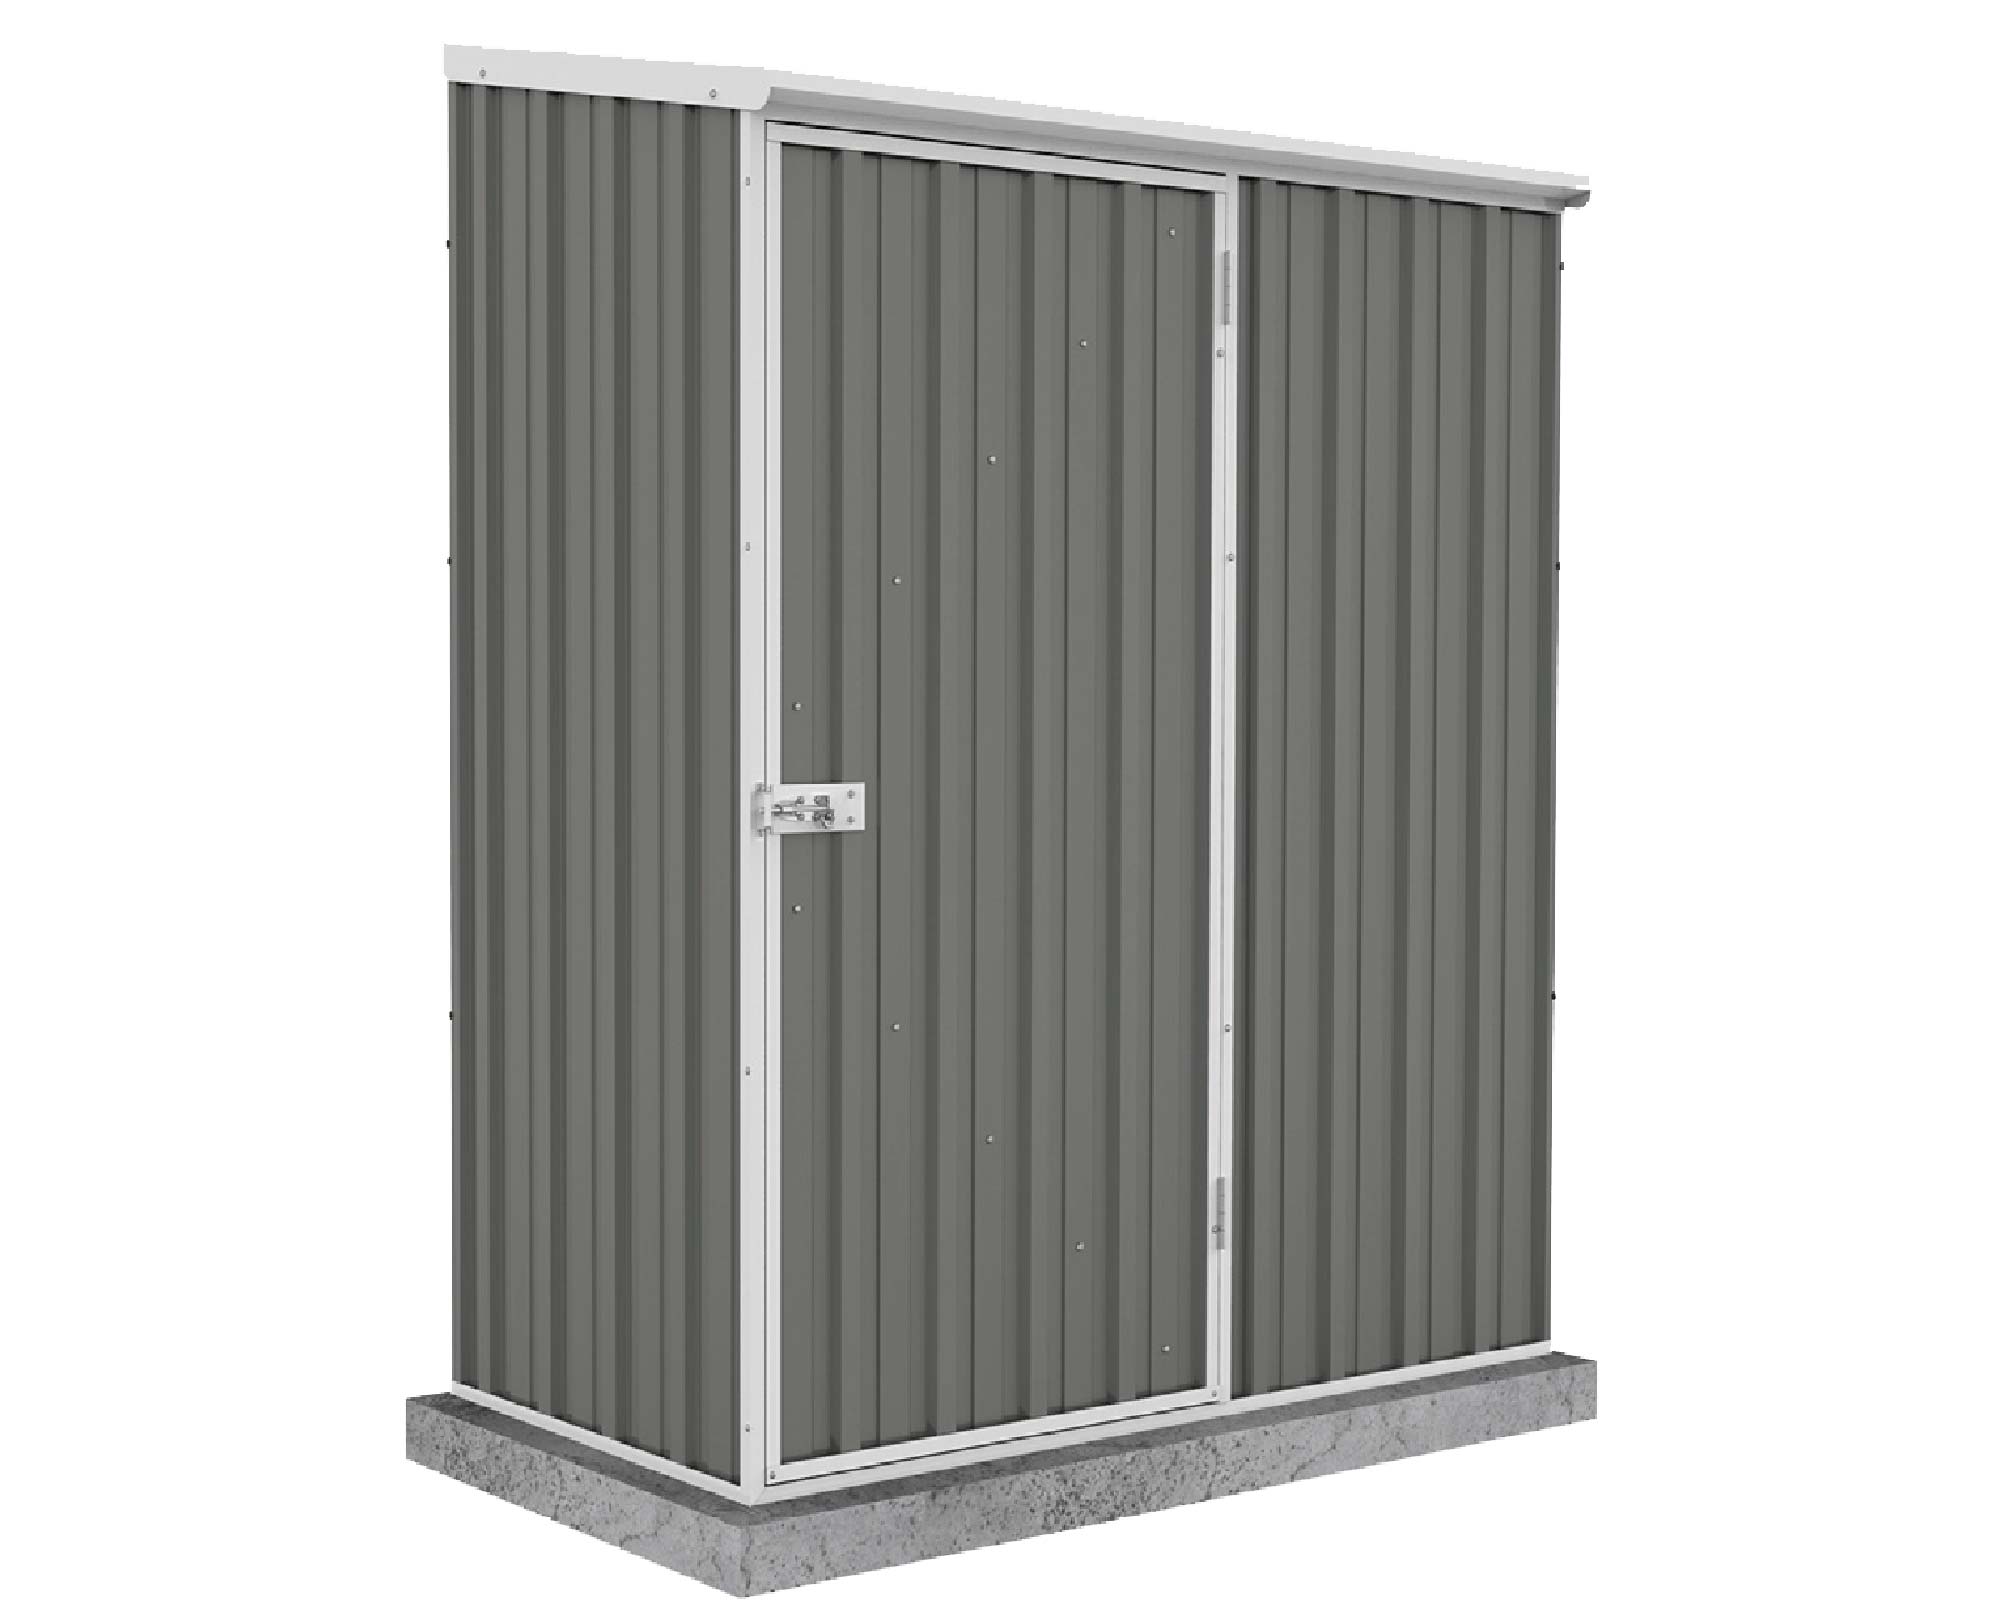 ABSCO Single Door Shed 152cm wide x 78cm deep and 195cm tall in Woodland Grey